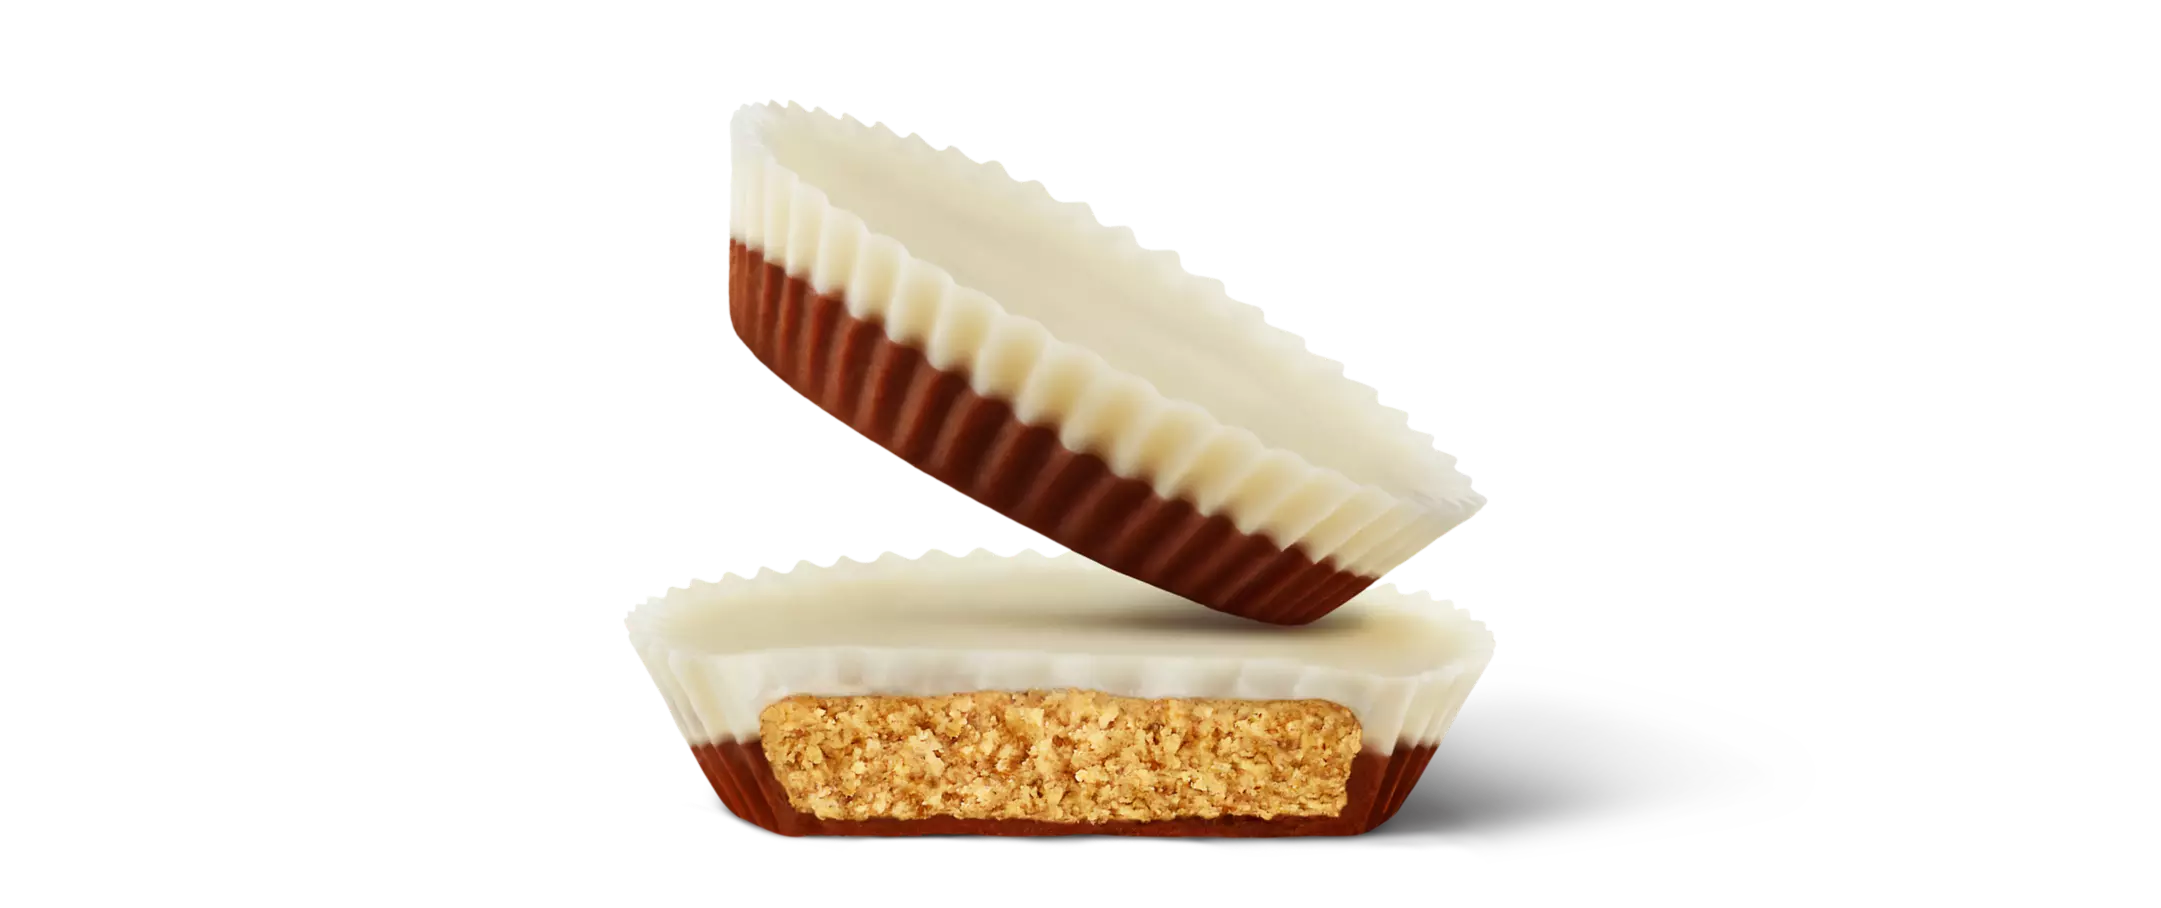 REESE'S Mallow-Top Marshmallow Creme with Milk Chocolate Peanut Butter Cups, 1.4 oz, 24 count box - Out of Package